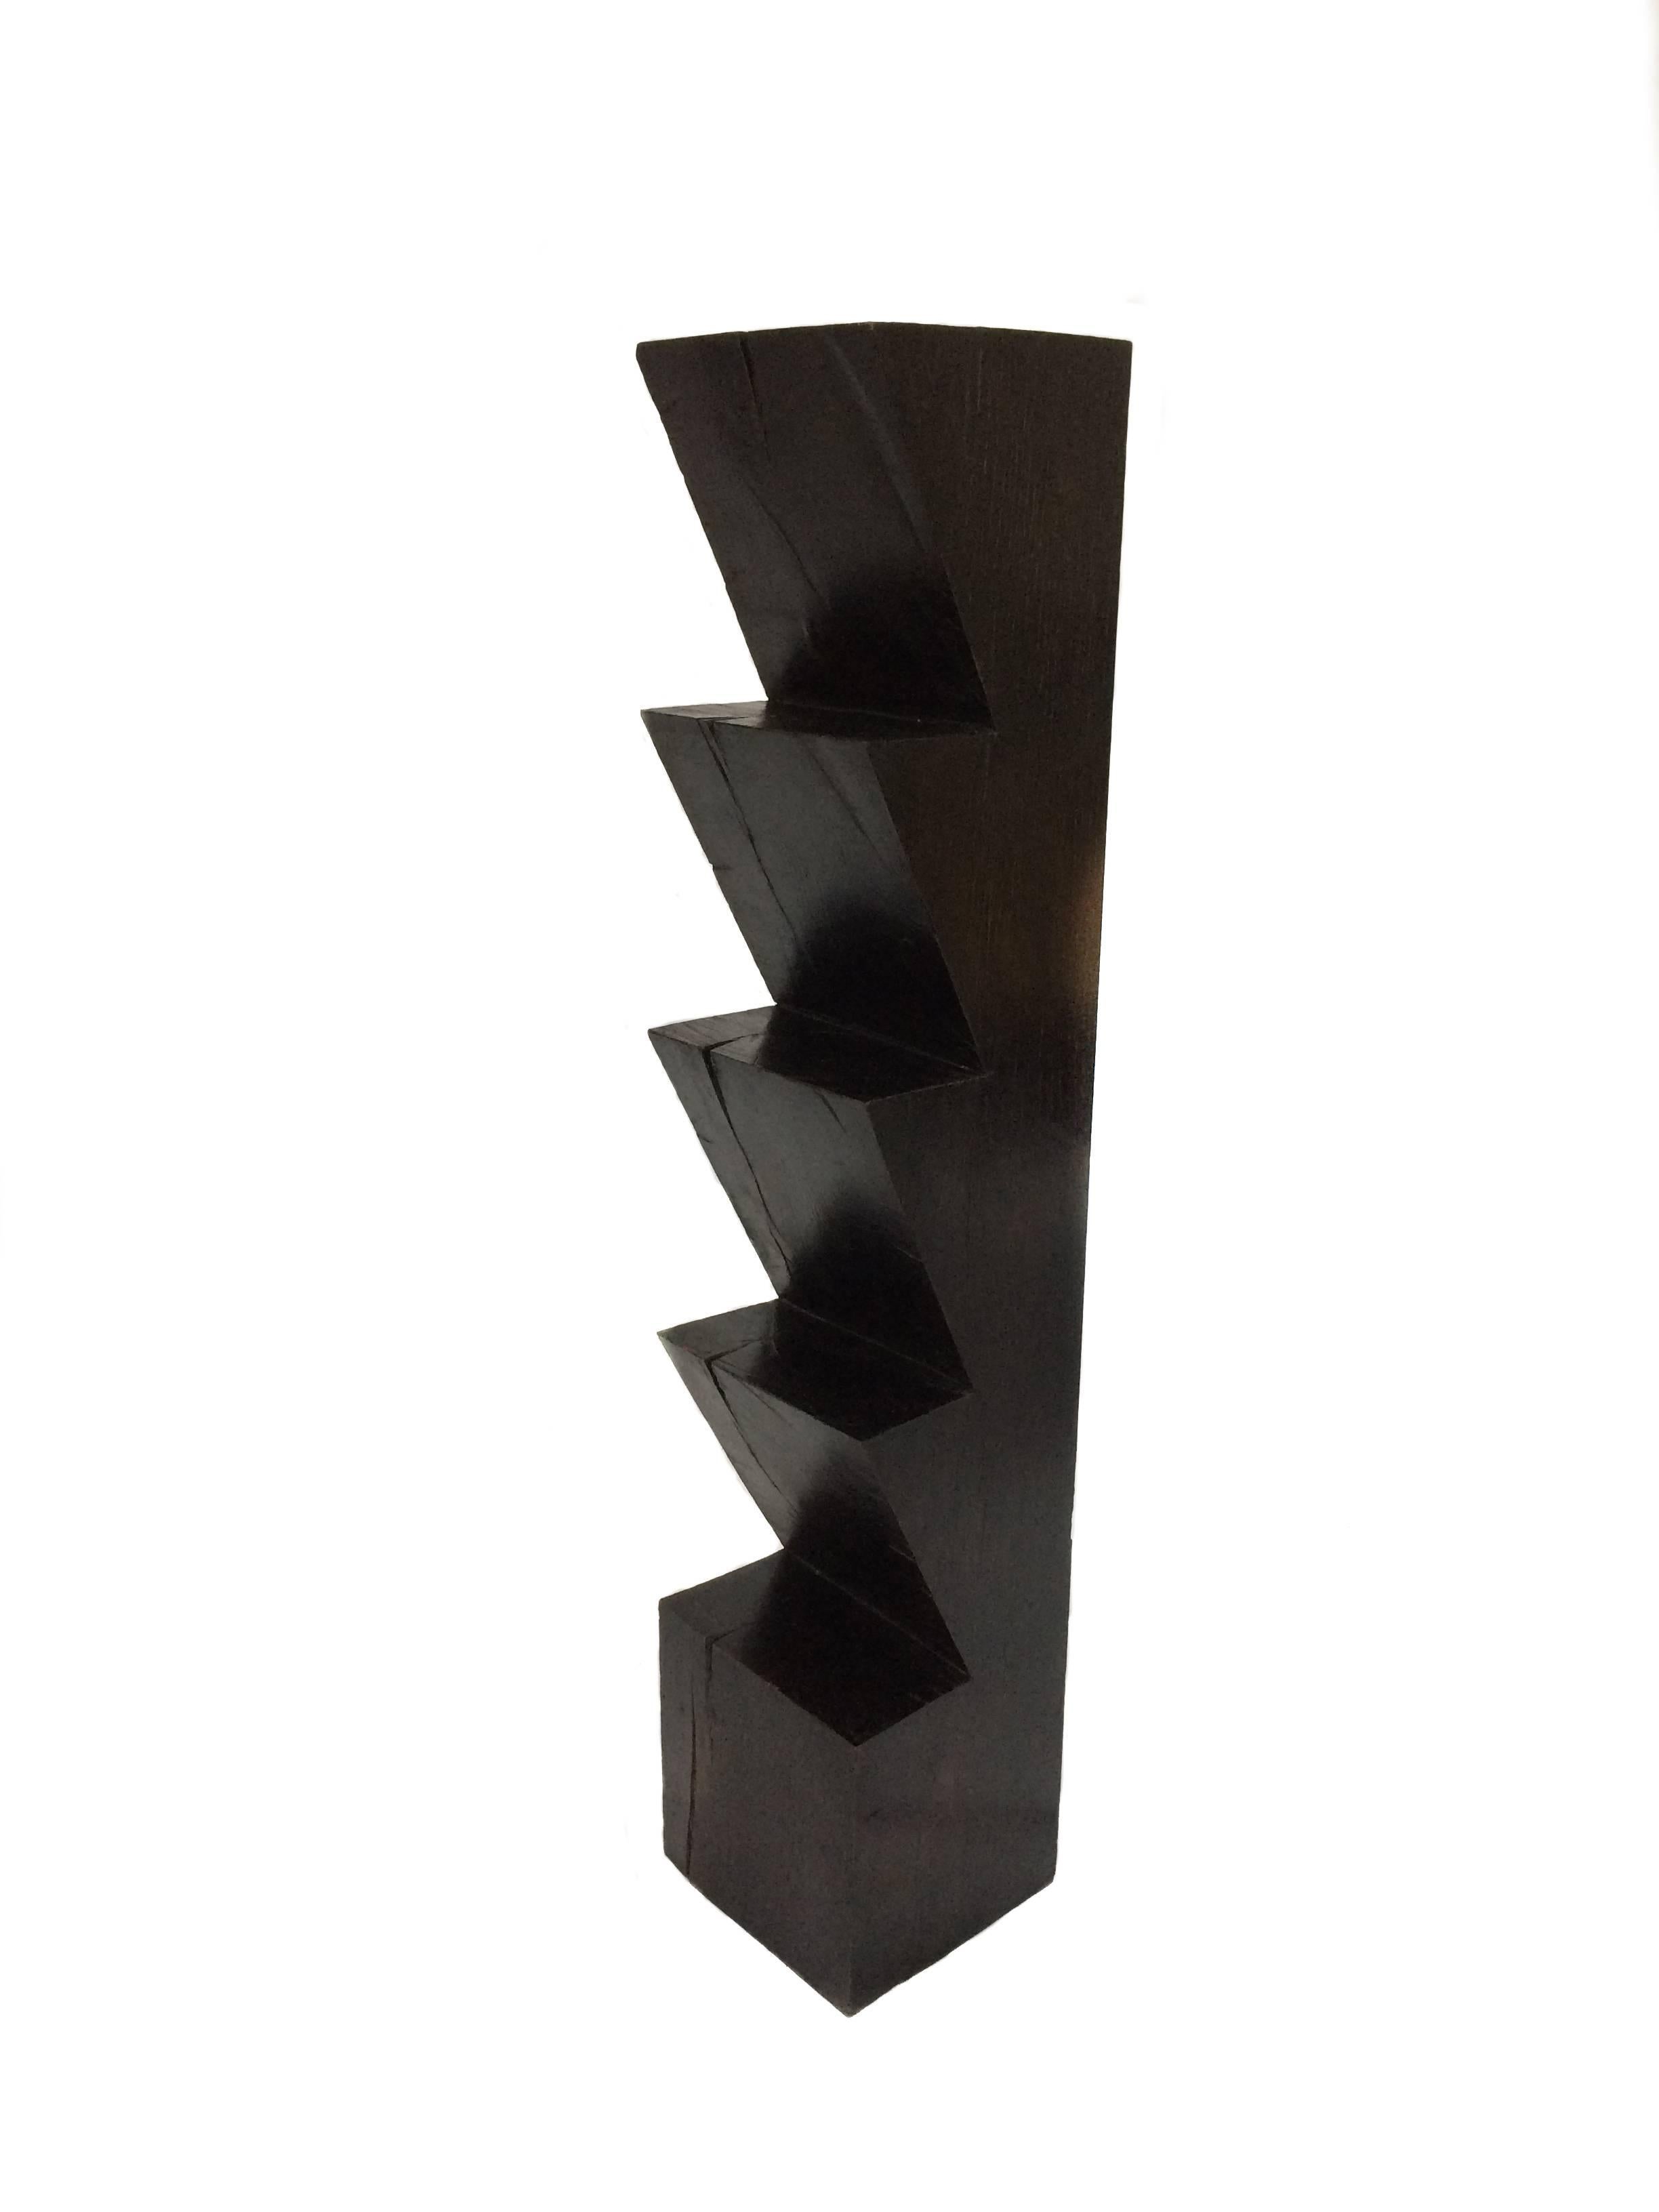 Dominic McHenry Abstract Sculpture - 01